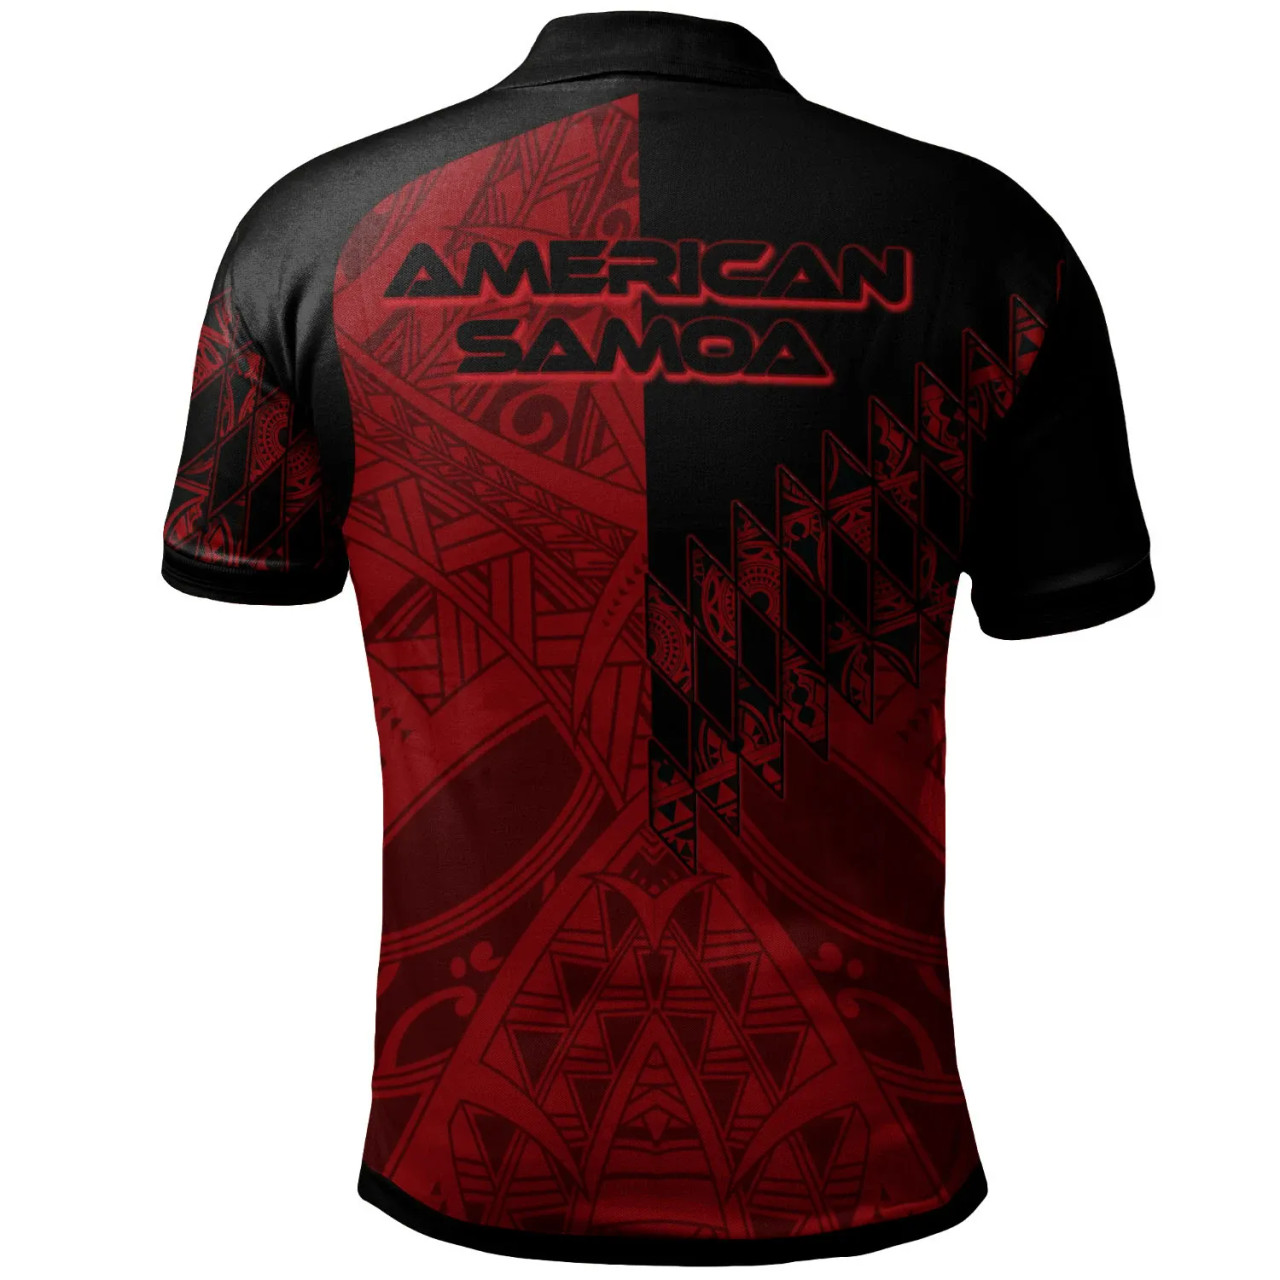 American Samoa Polo Shirt - Red Color Symmetry Style 2